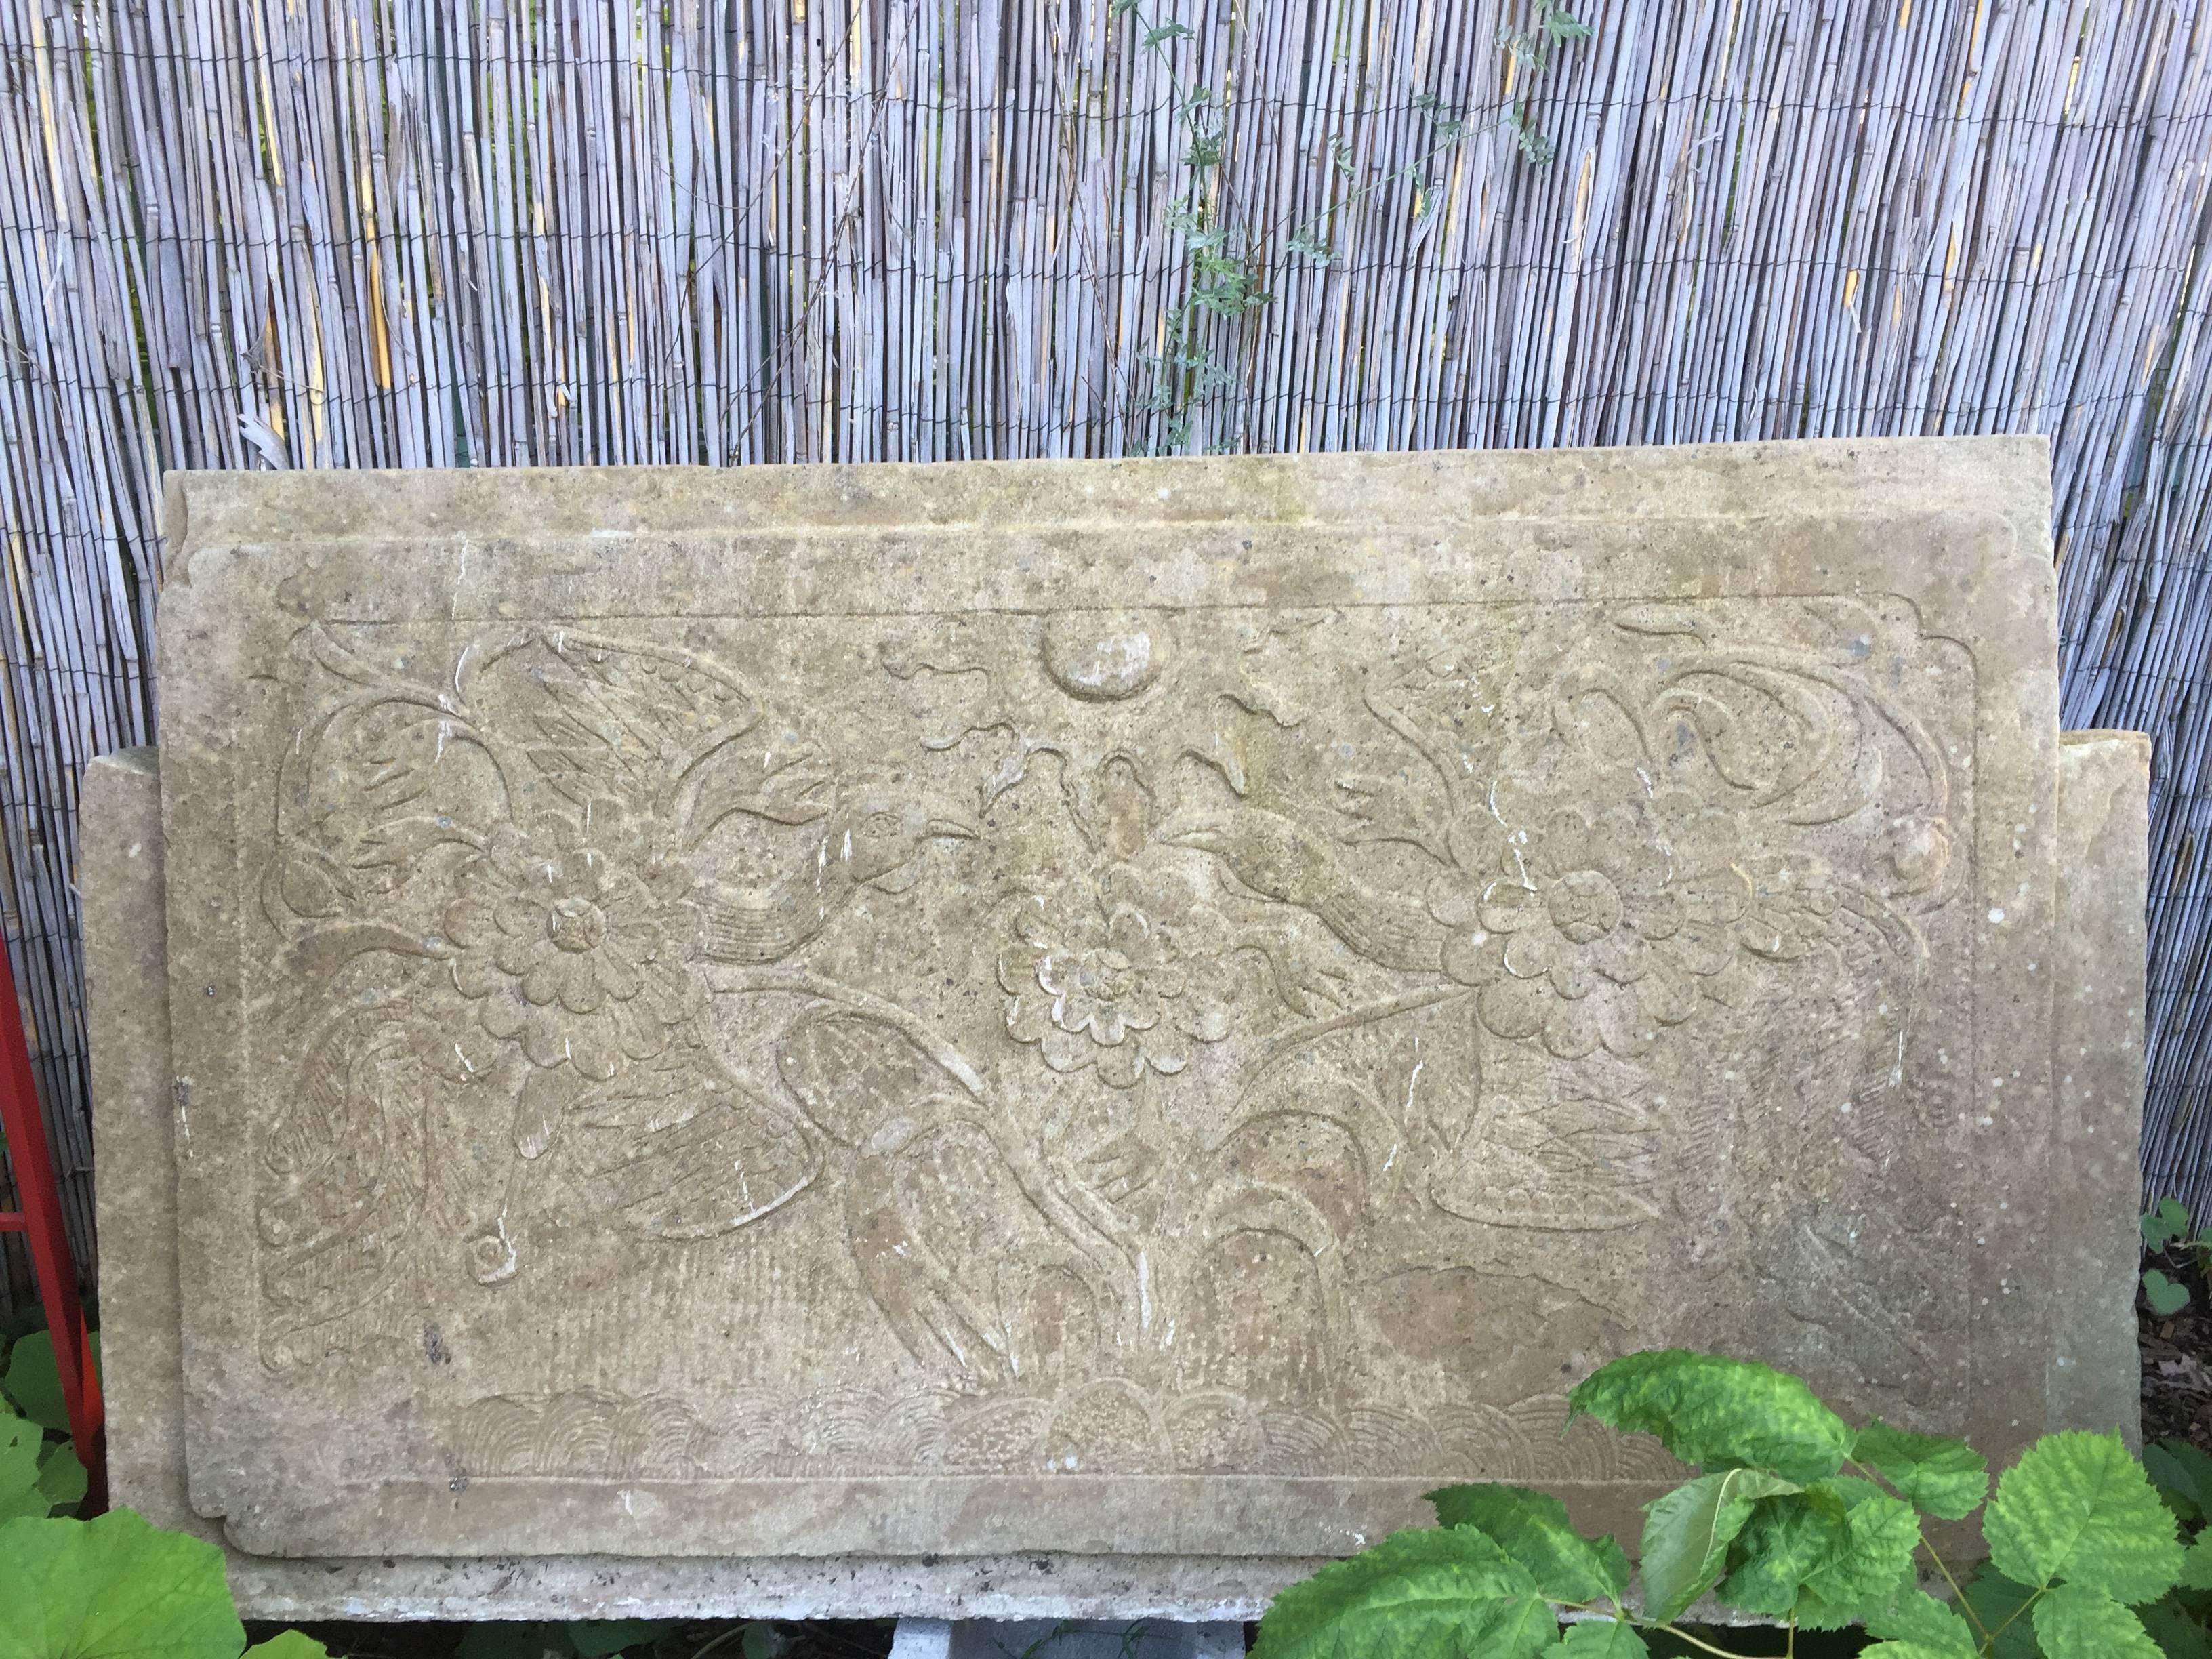 China a fine antique hand carved one-of-a-kind limestone -Double Phoenix-stone architectural panel or stele, Qing dynasty, 19th century. 

An excellent consideration for an indoor or  outdoor installation .

Dimensions: 23.5 inches high and 43